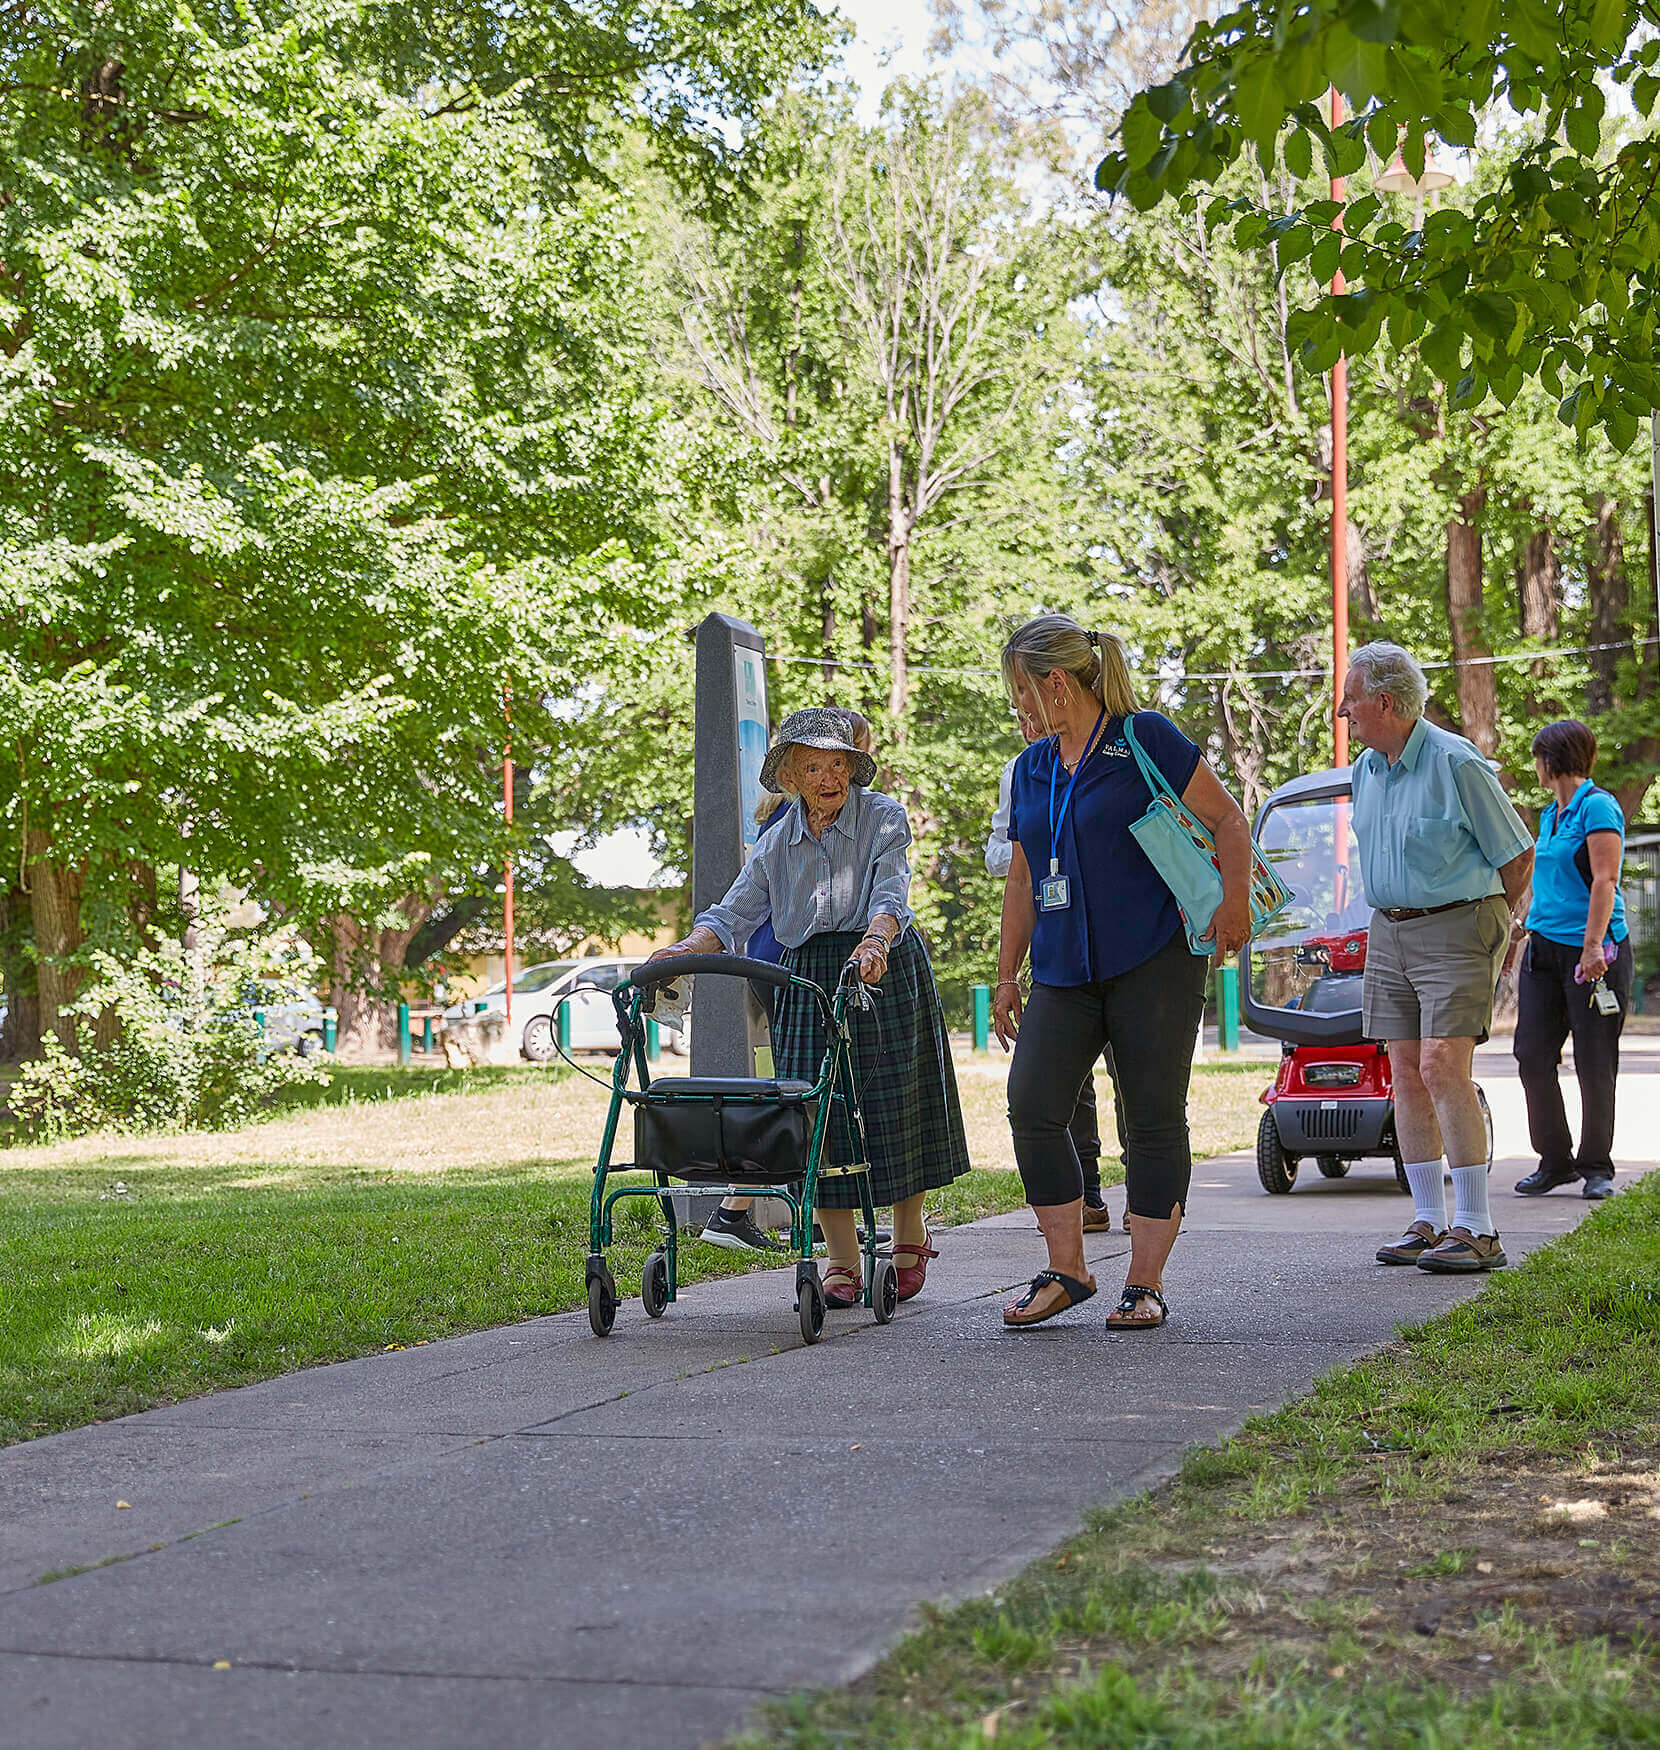 A woman in a long green skirt and blue shirt walking down a garden path using a walker. There are bright green trees in the background and another Woman in a Valmar uniform is walking beside her.